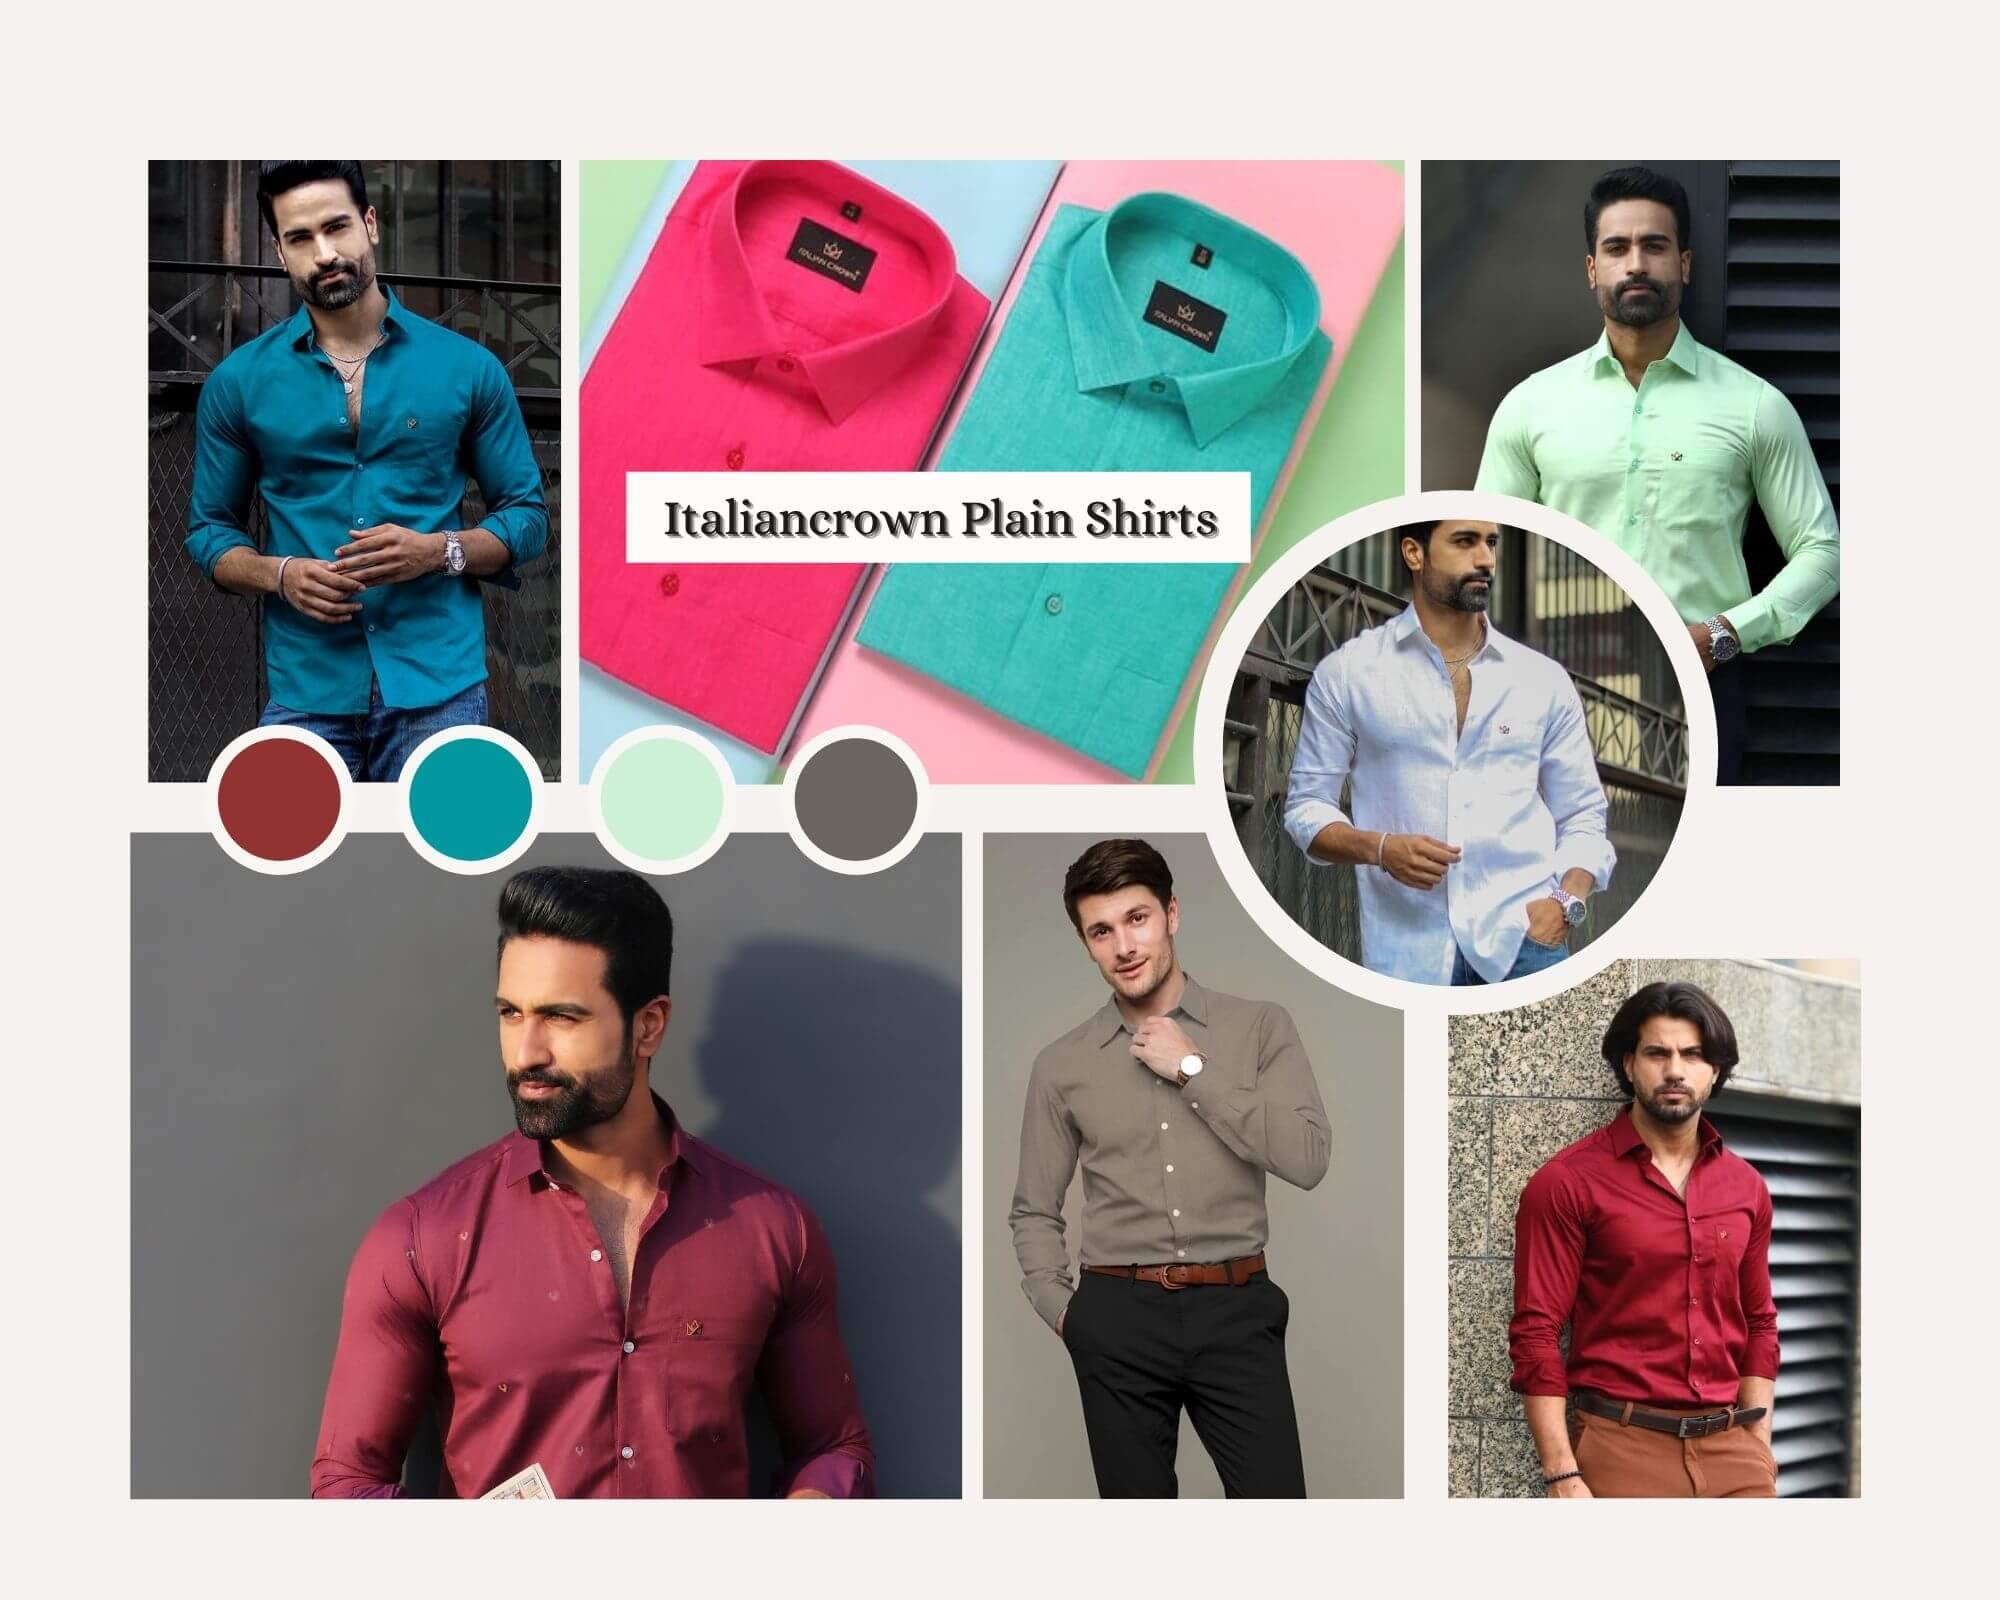 Buy Men's Plain Shirts Online at Low Prices – Italiancrown